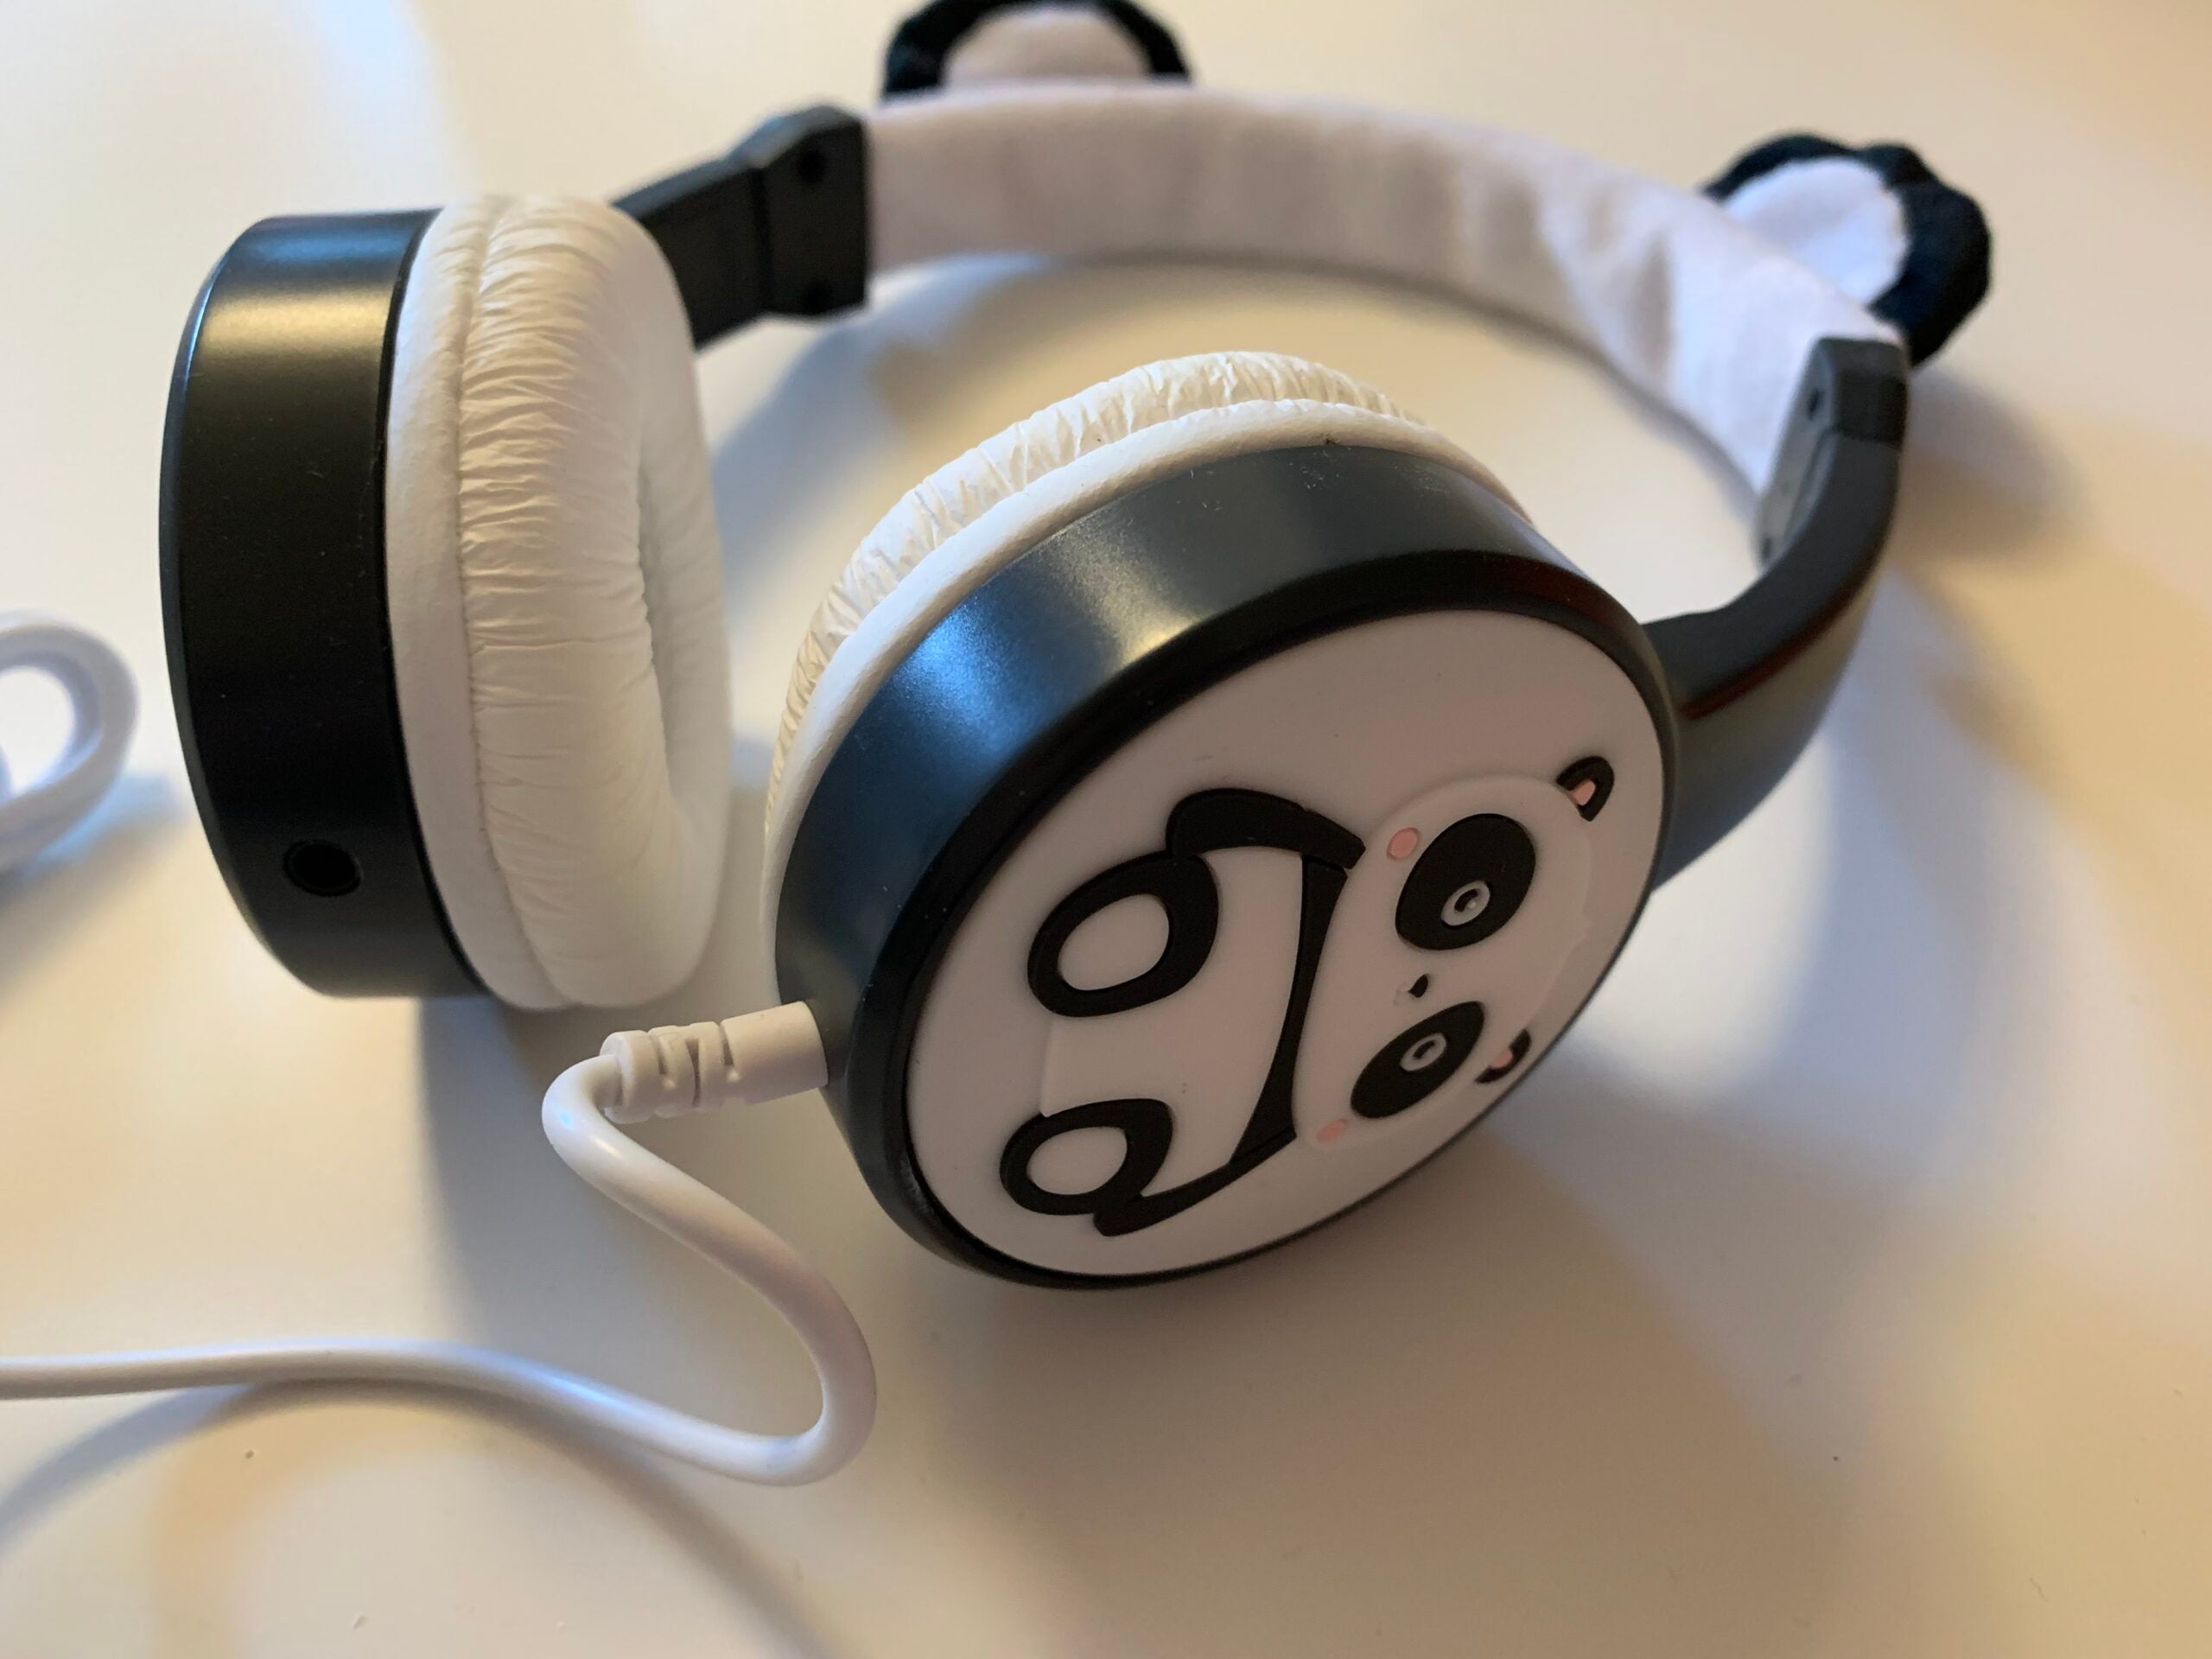 Planet Buddies Volume Limited Headphones Review | Trusted Reviews